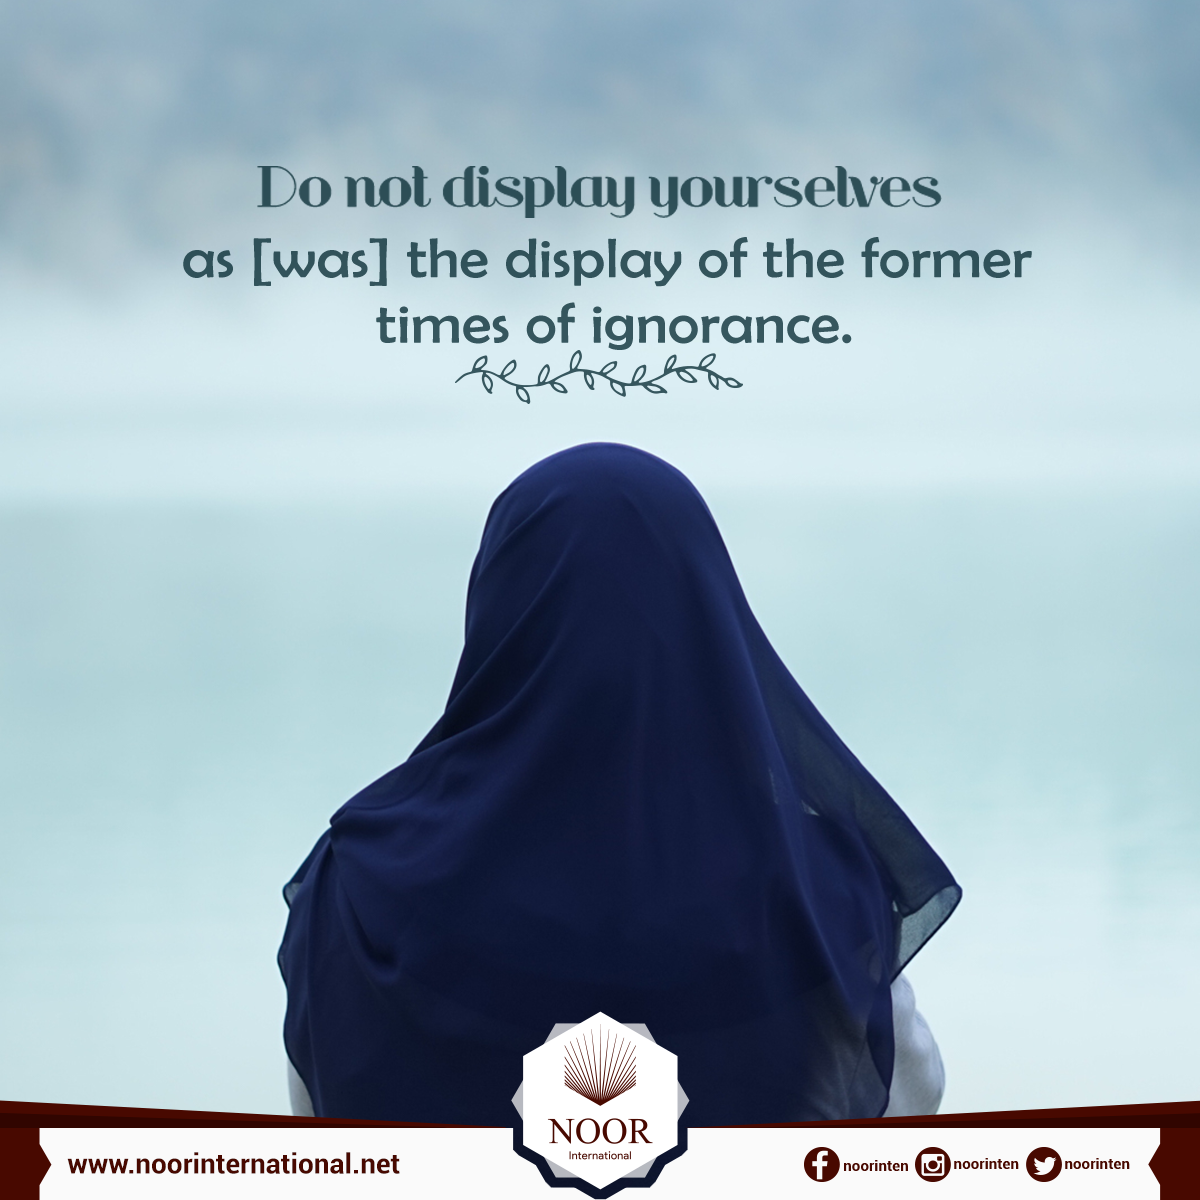 Do not display yourselves as [was] the display of the former times of ignorance.